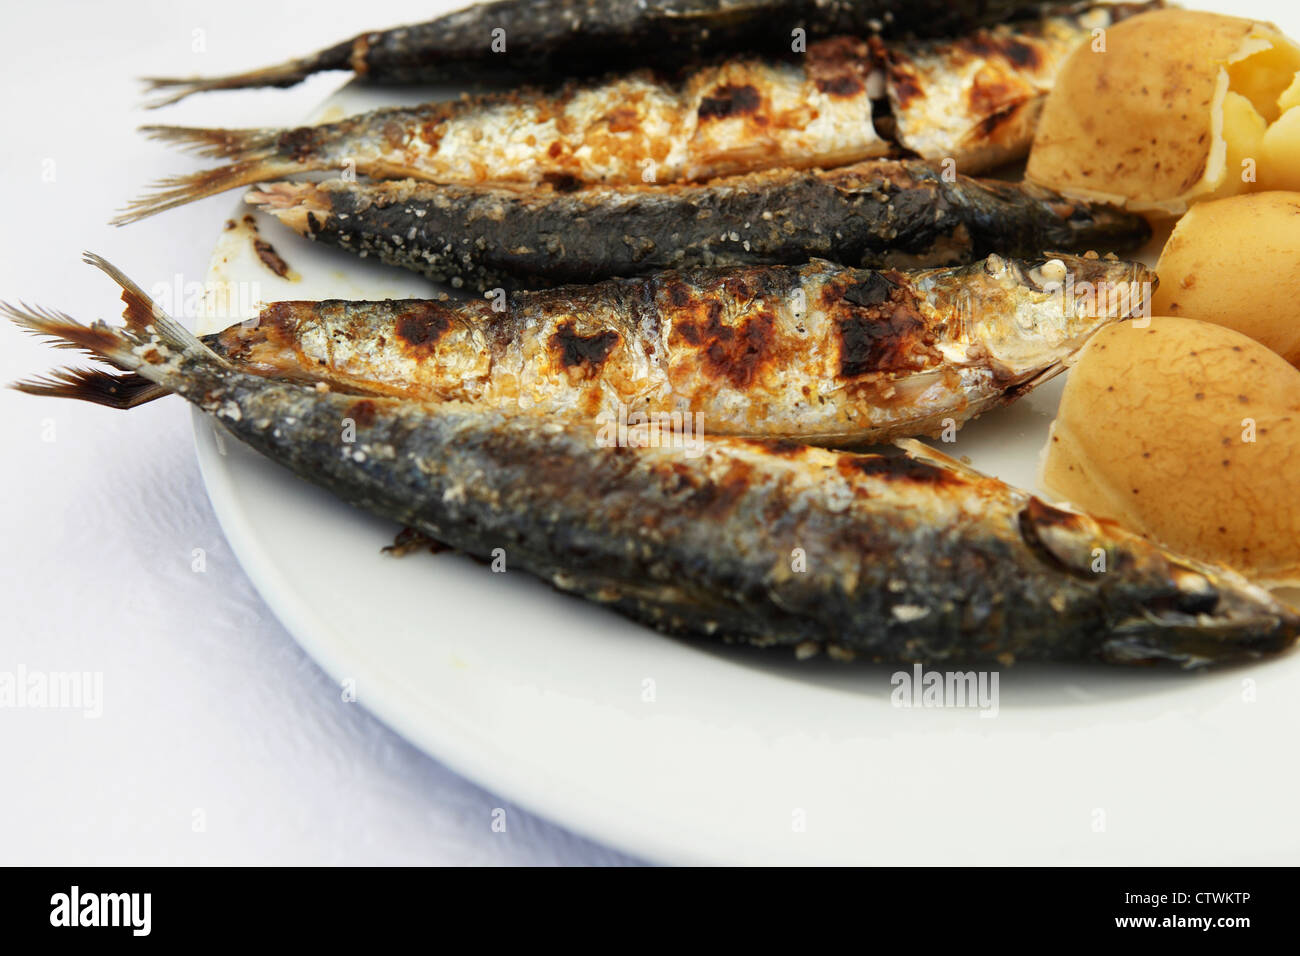 Grilled sardines are served on a plate in Peniche, Portugal. Stock Photo